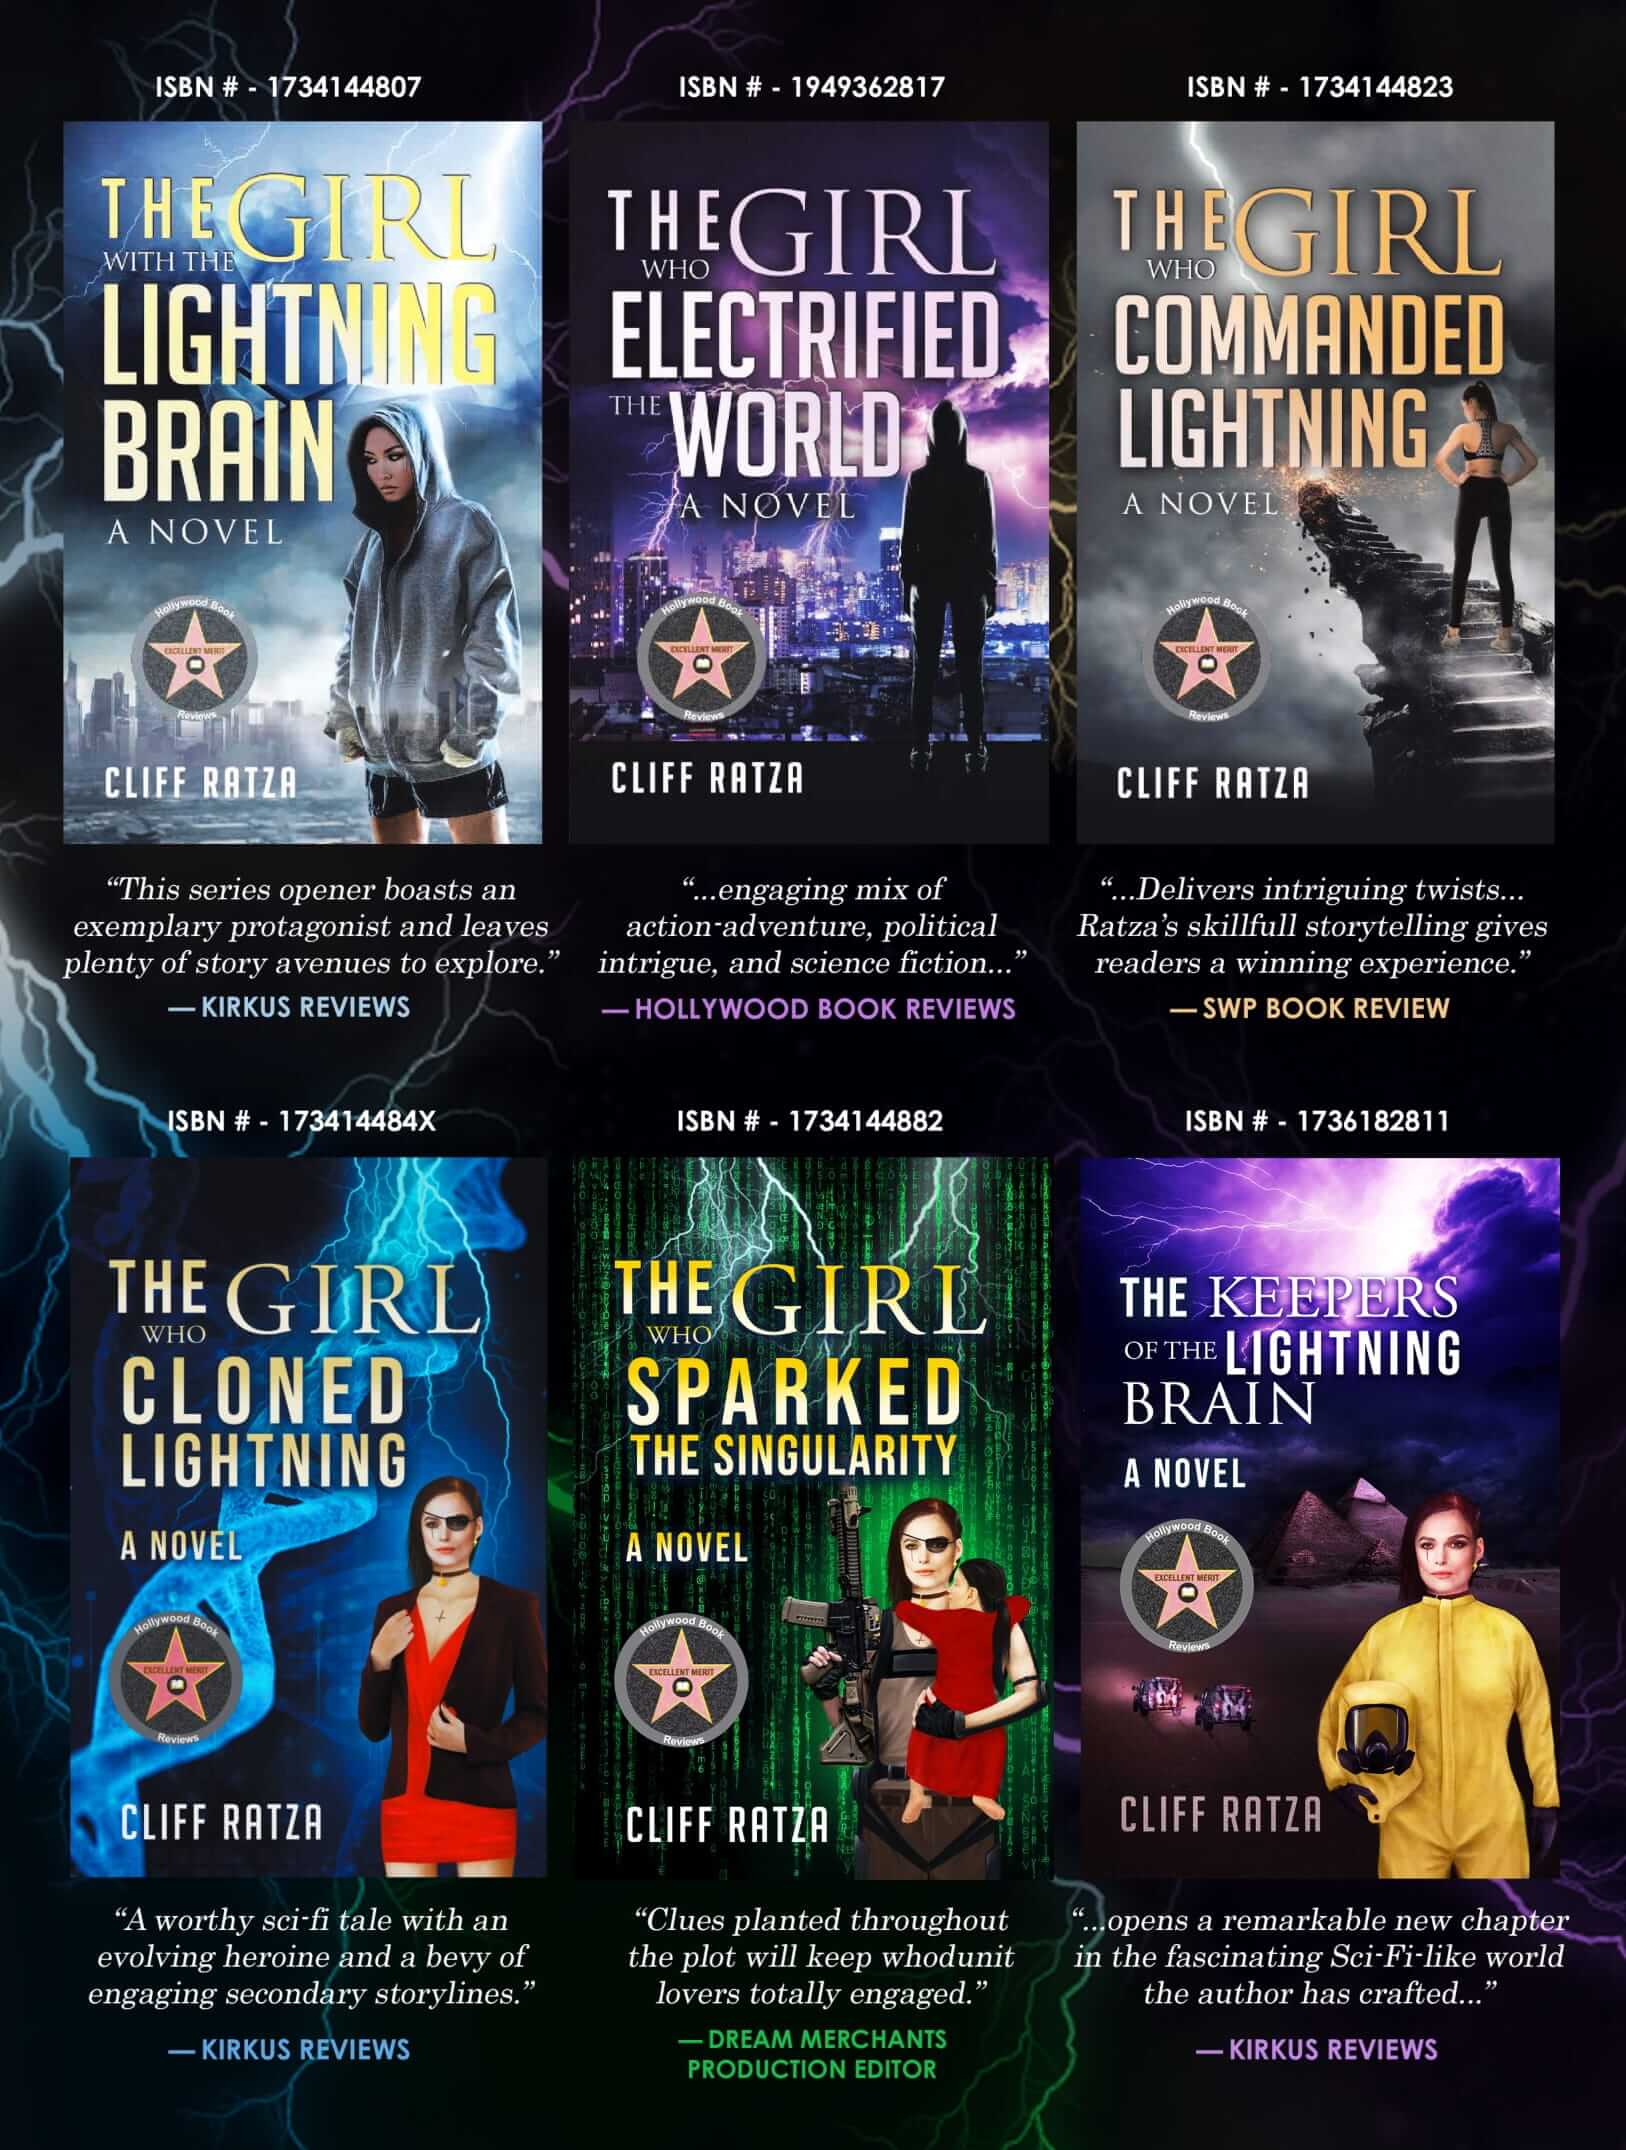 Book covers of the Lightning Brain Series